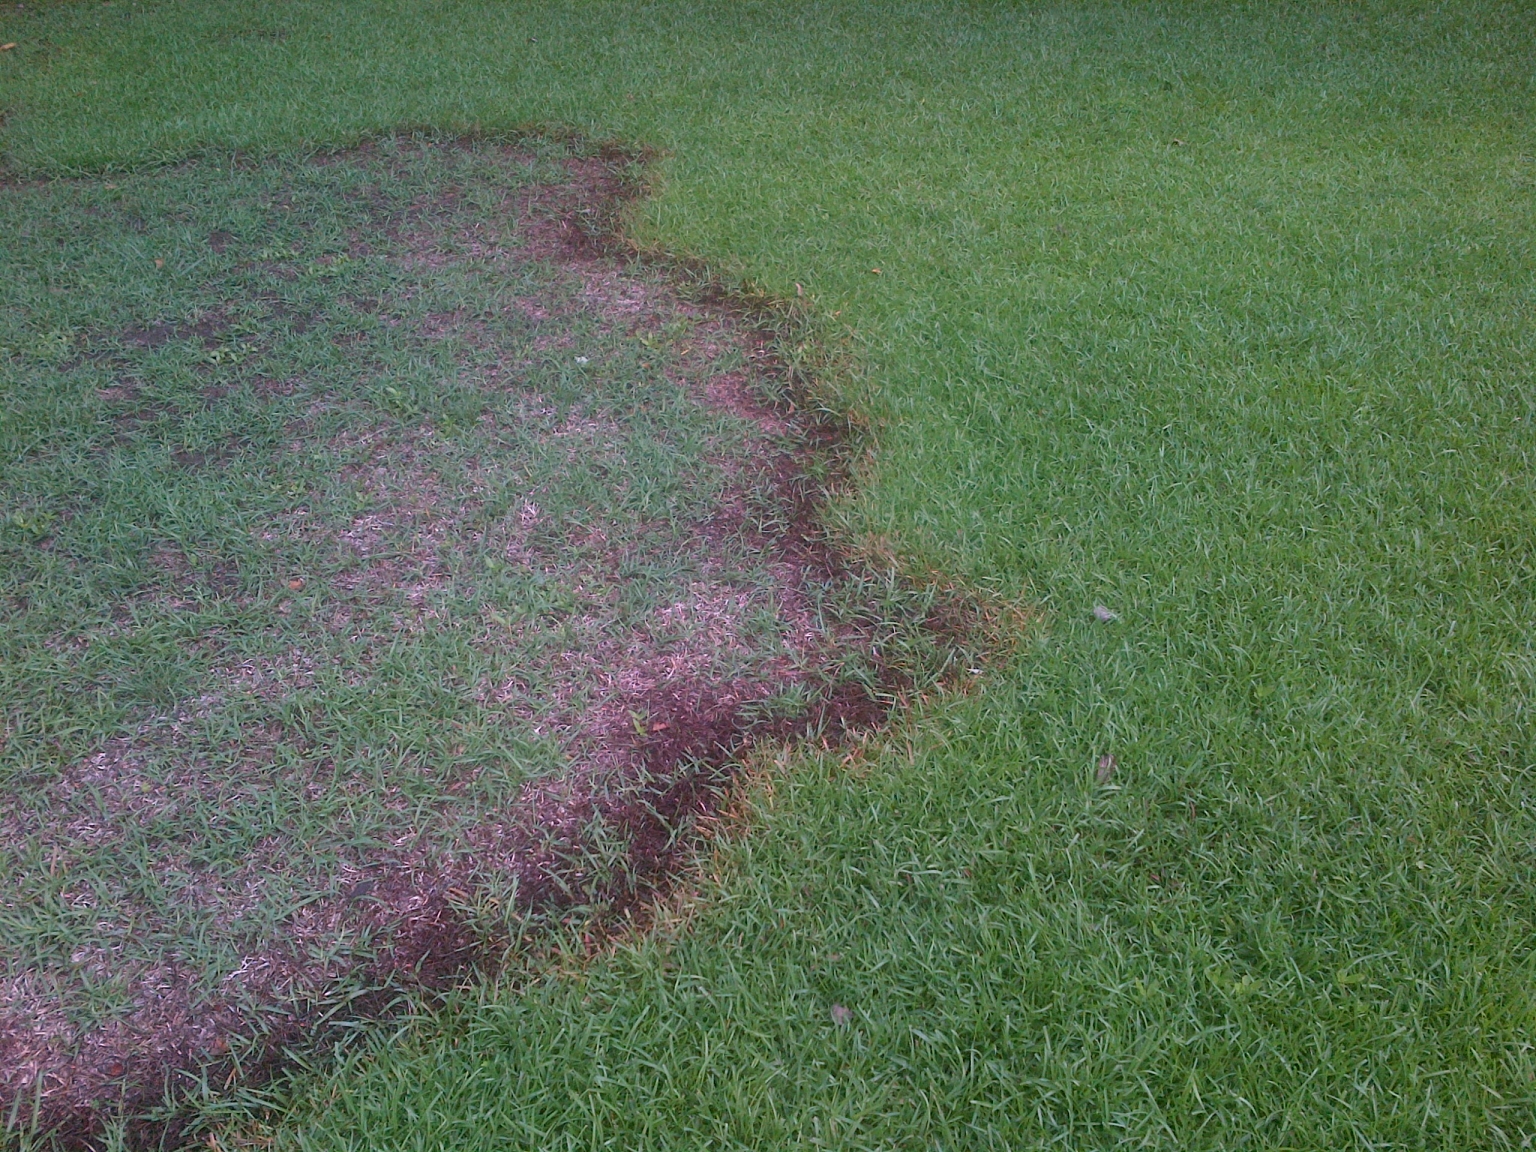 Brown Patch On Fescue And Other Grasses Close Up Pictures Walter